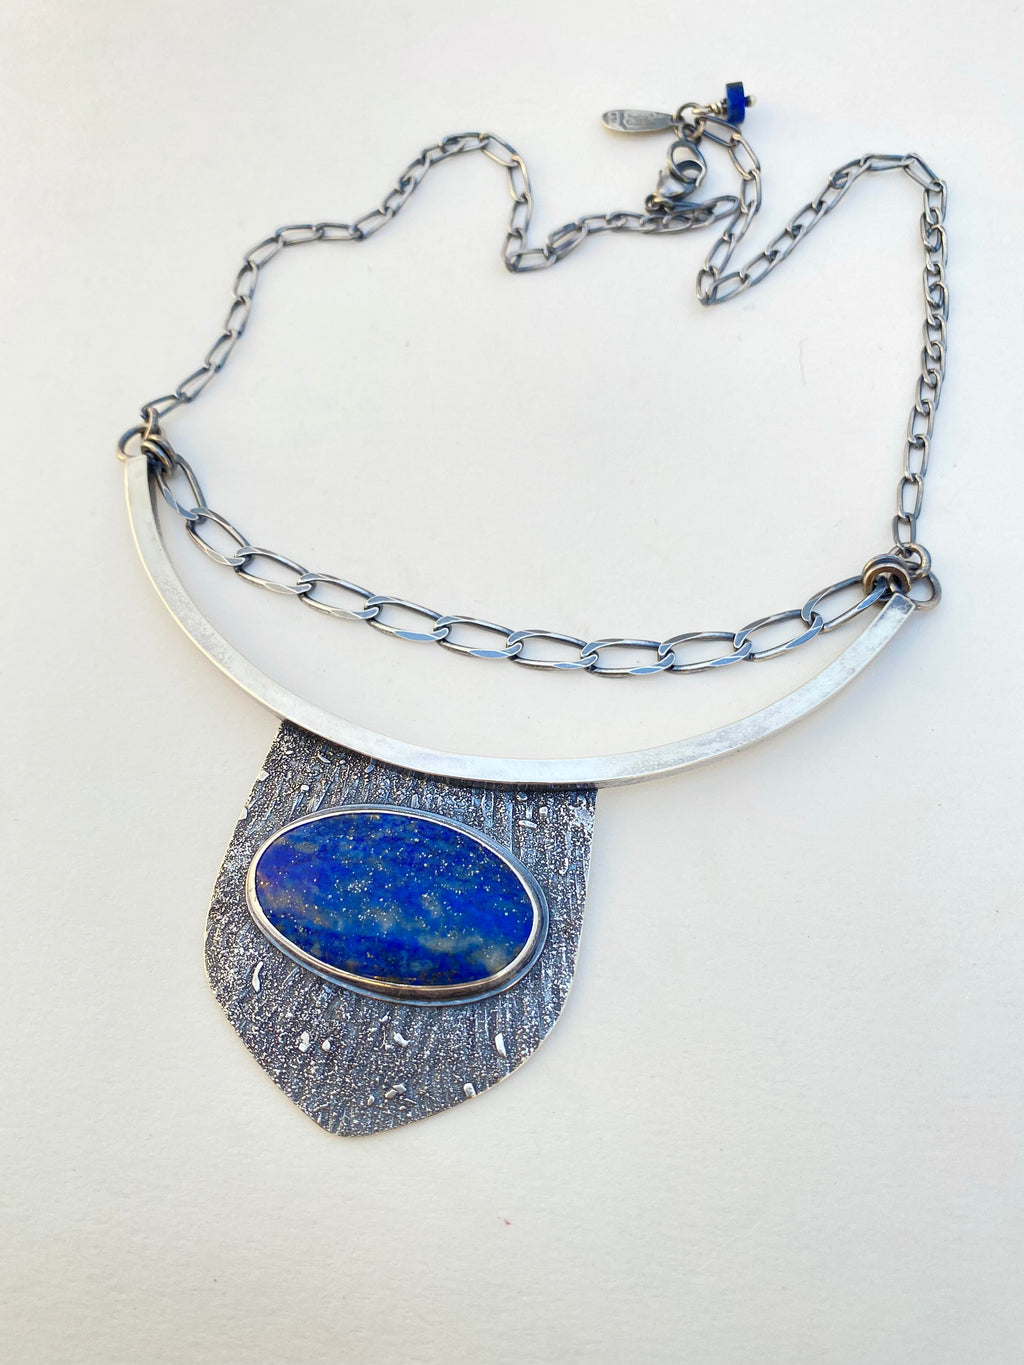 Stardust Statement Necklace with Lapis Lazuli and Sterling Silver